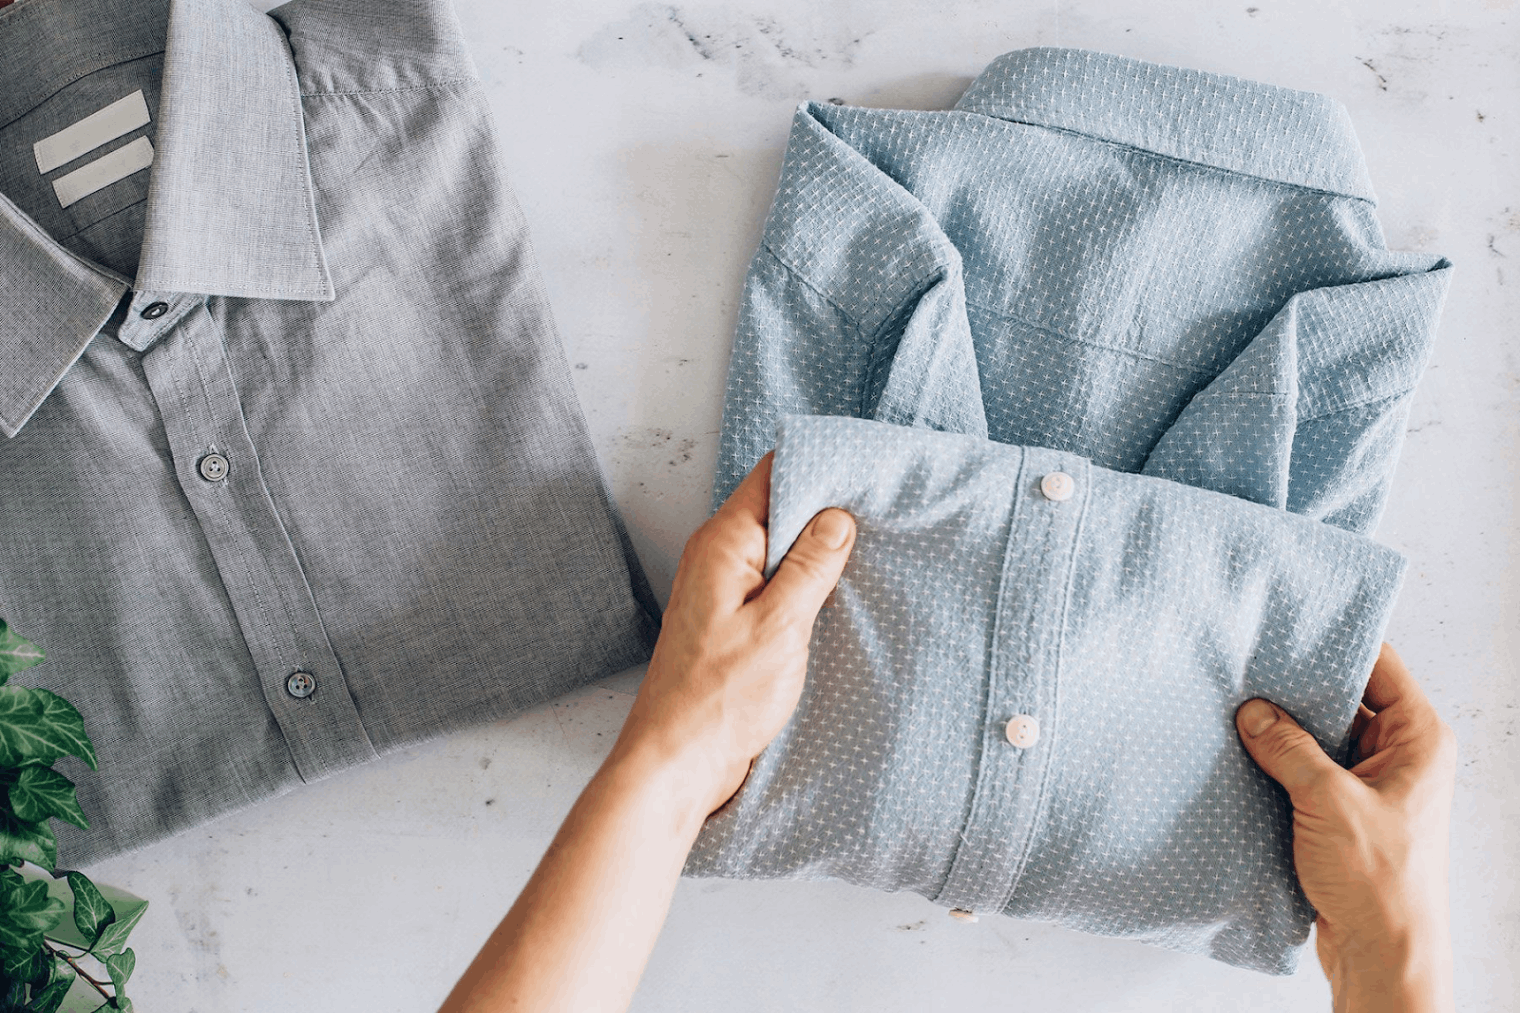 10 Ways To Fold Clothes That Will Save Space In The Closet